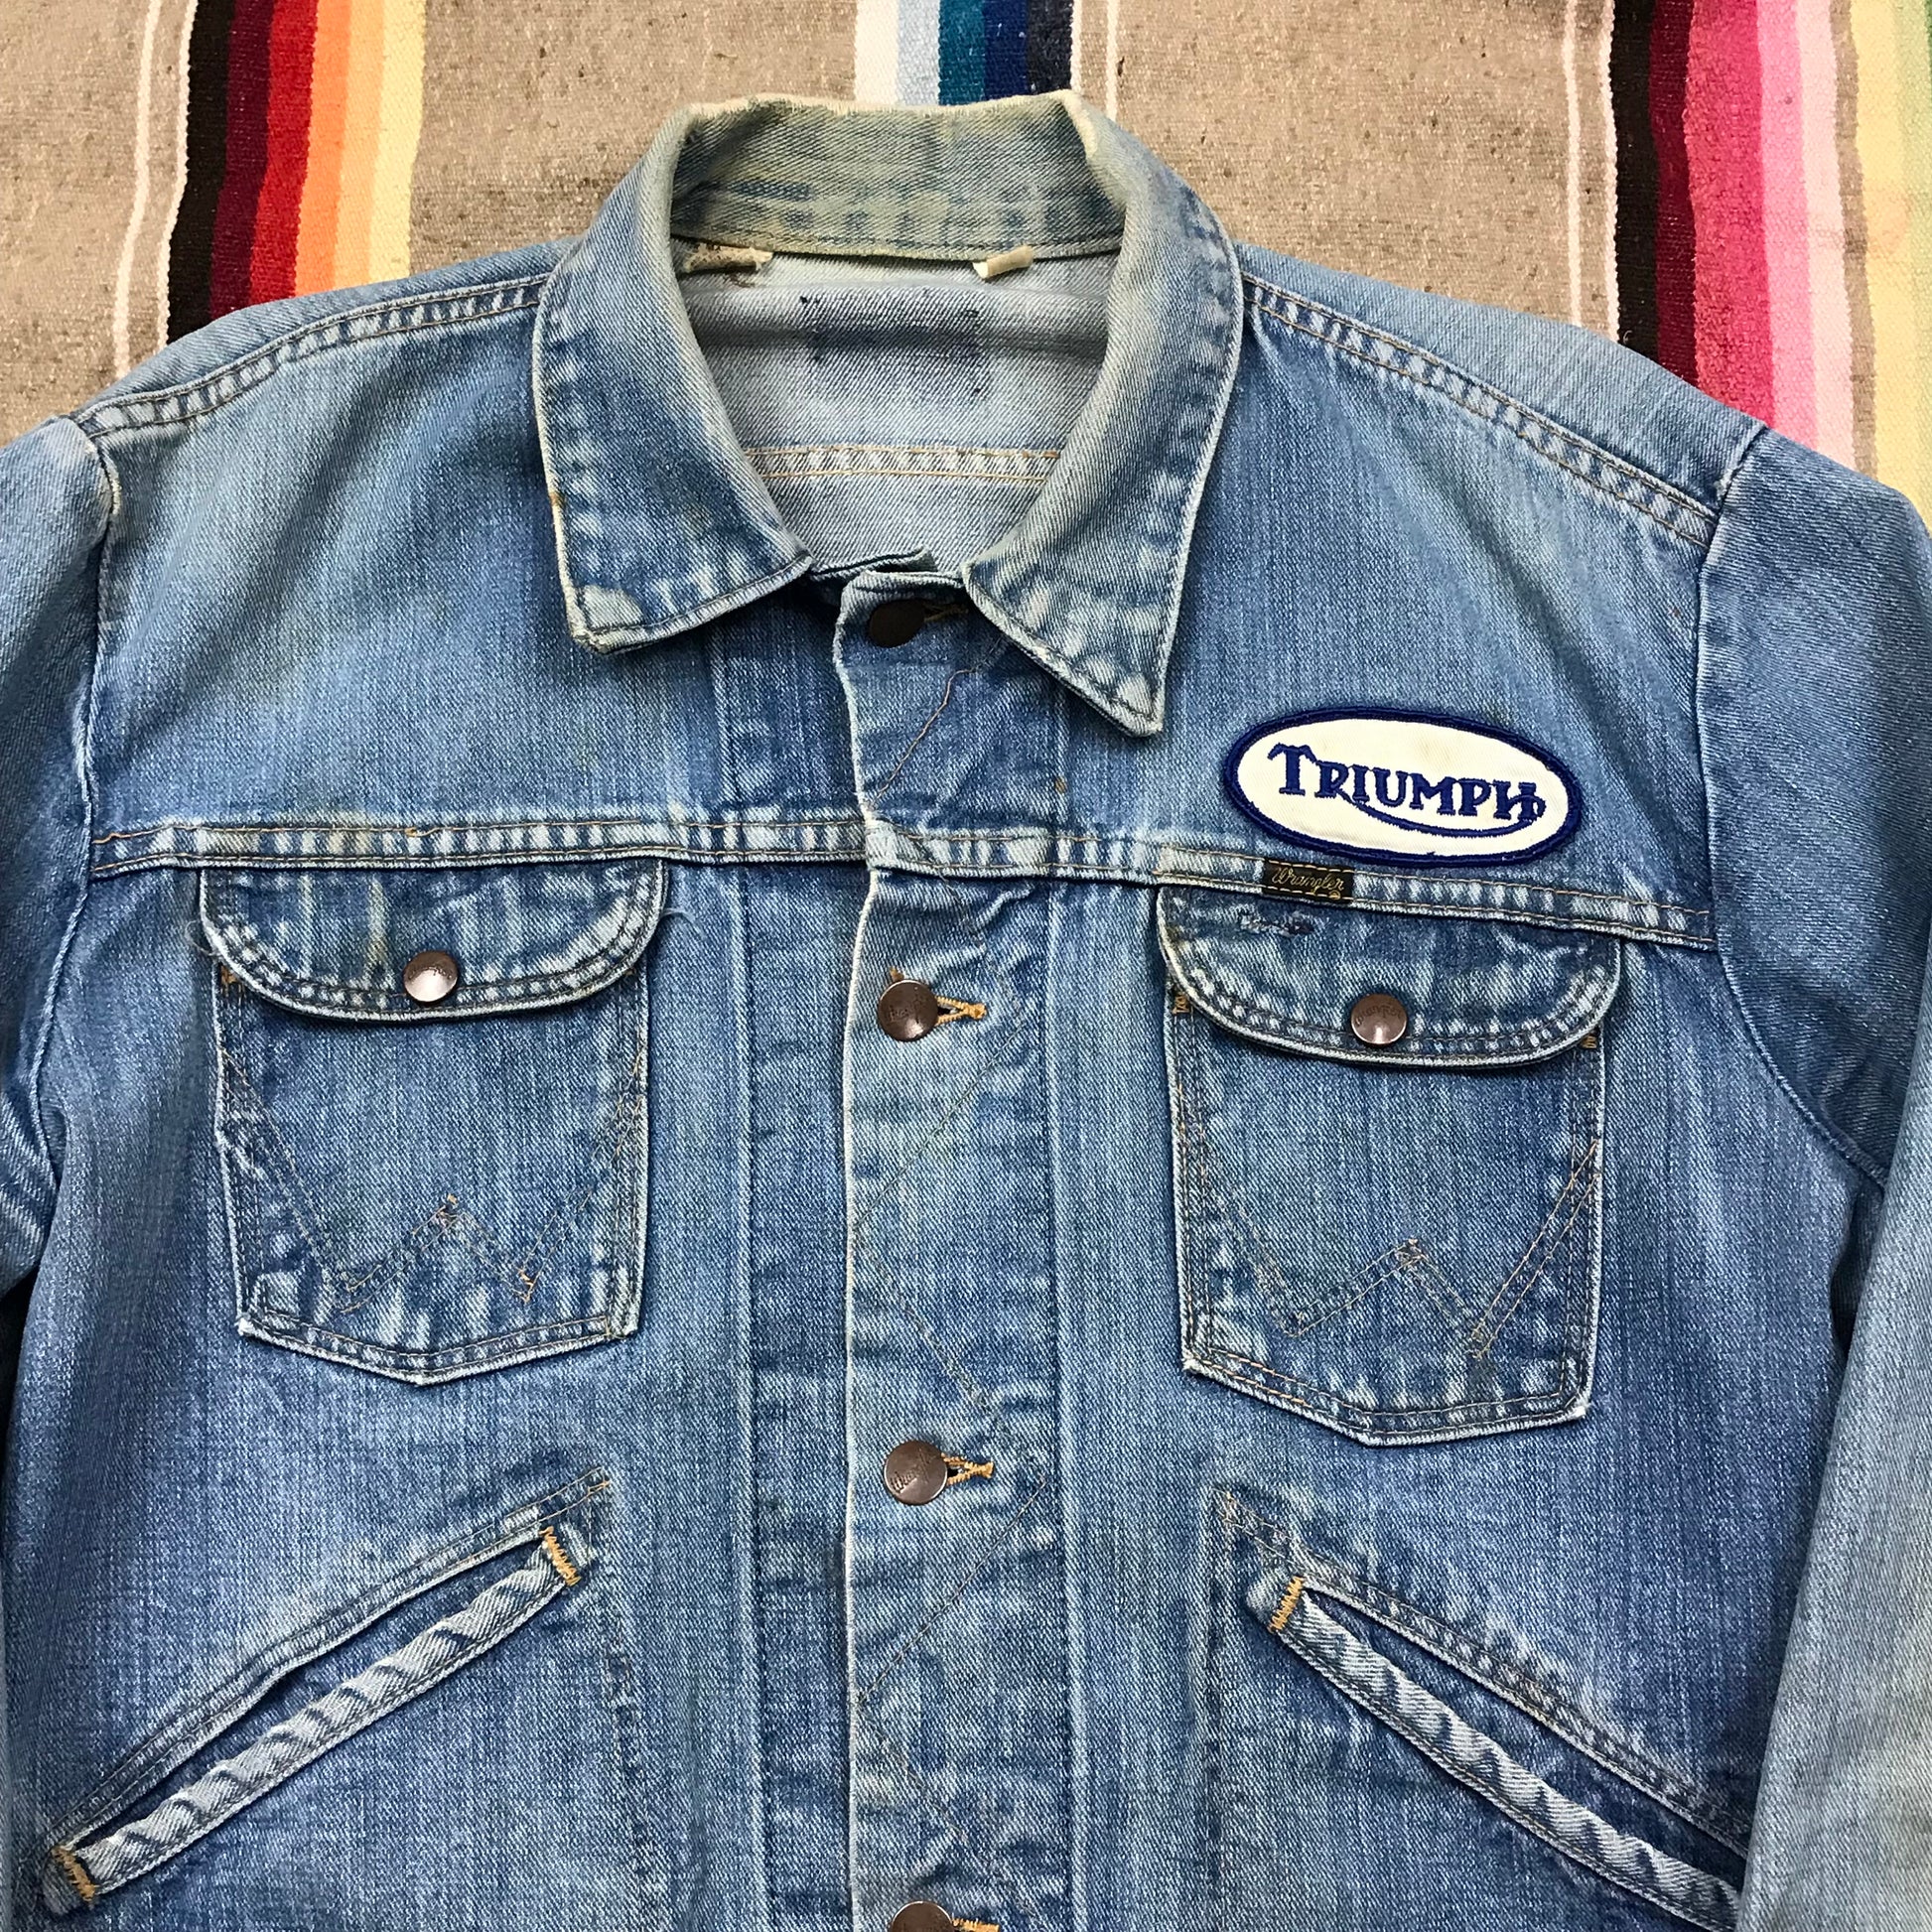 1960s Wrangler Distressed Wrangler Selvedge Denim Jacket with Triumph Motorcycle Patch Made in USA Size M